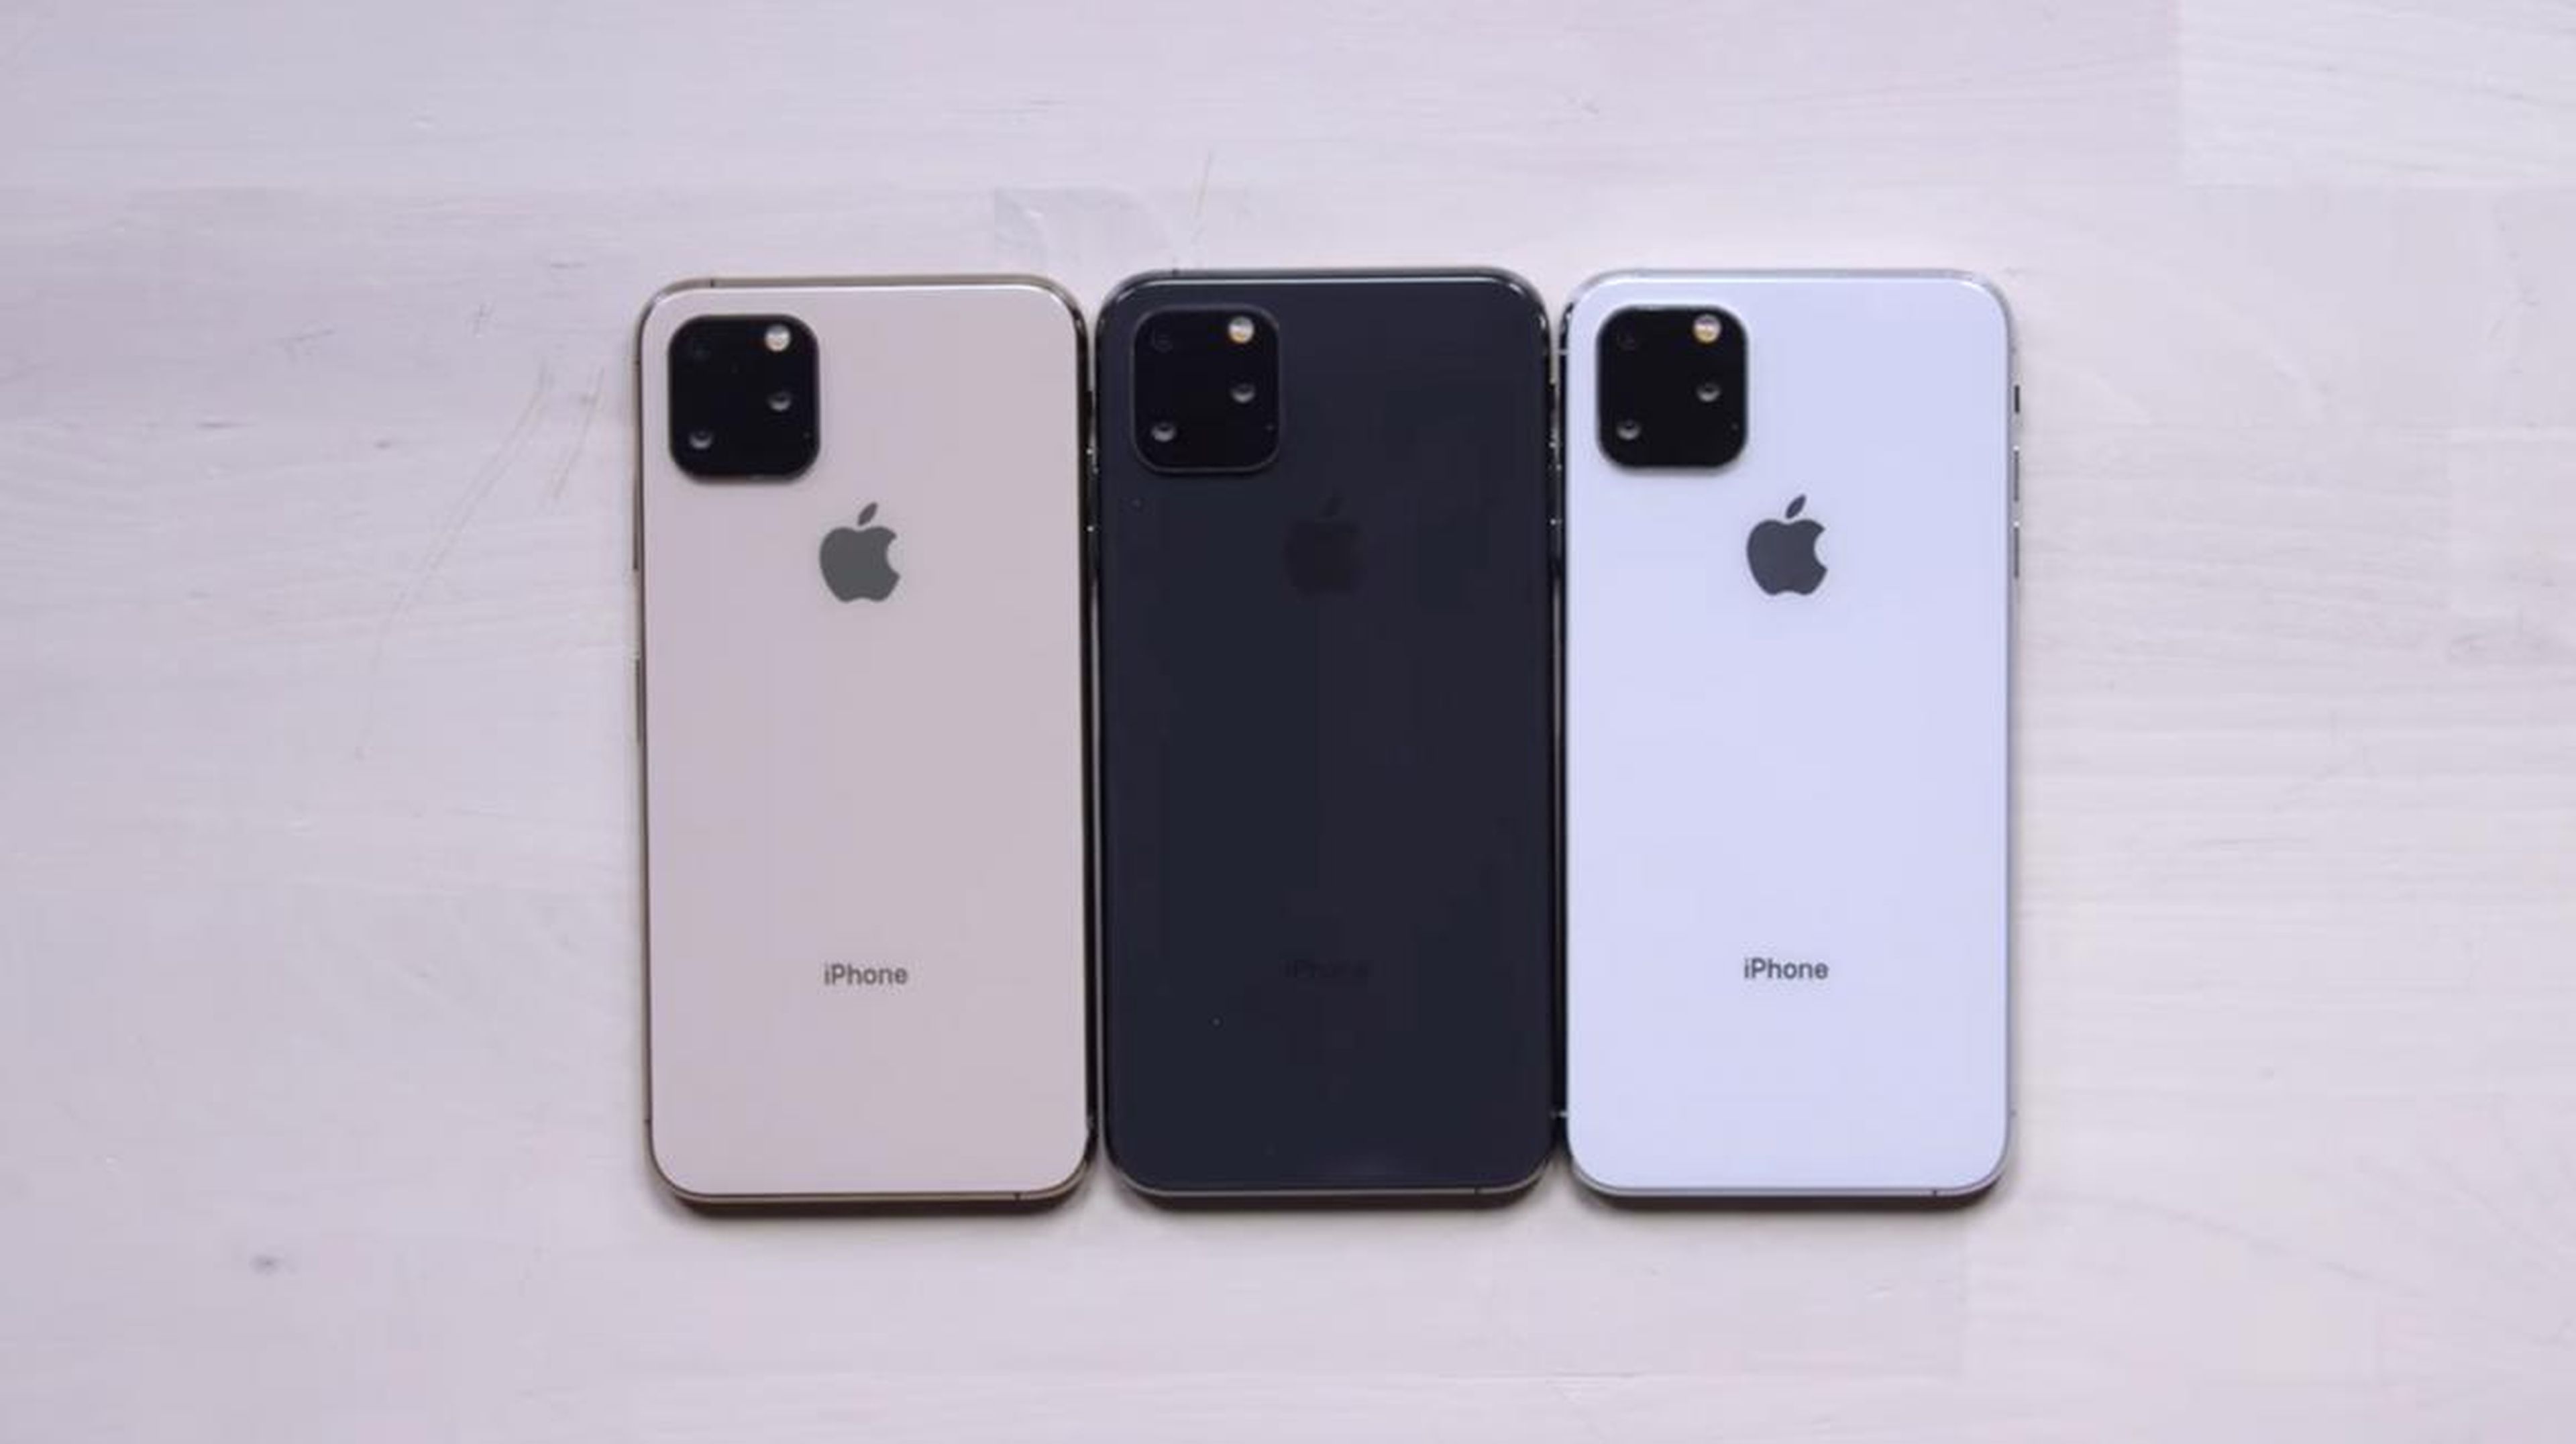 Which new iPhone would you want to buy?